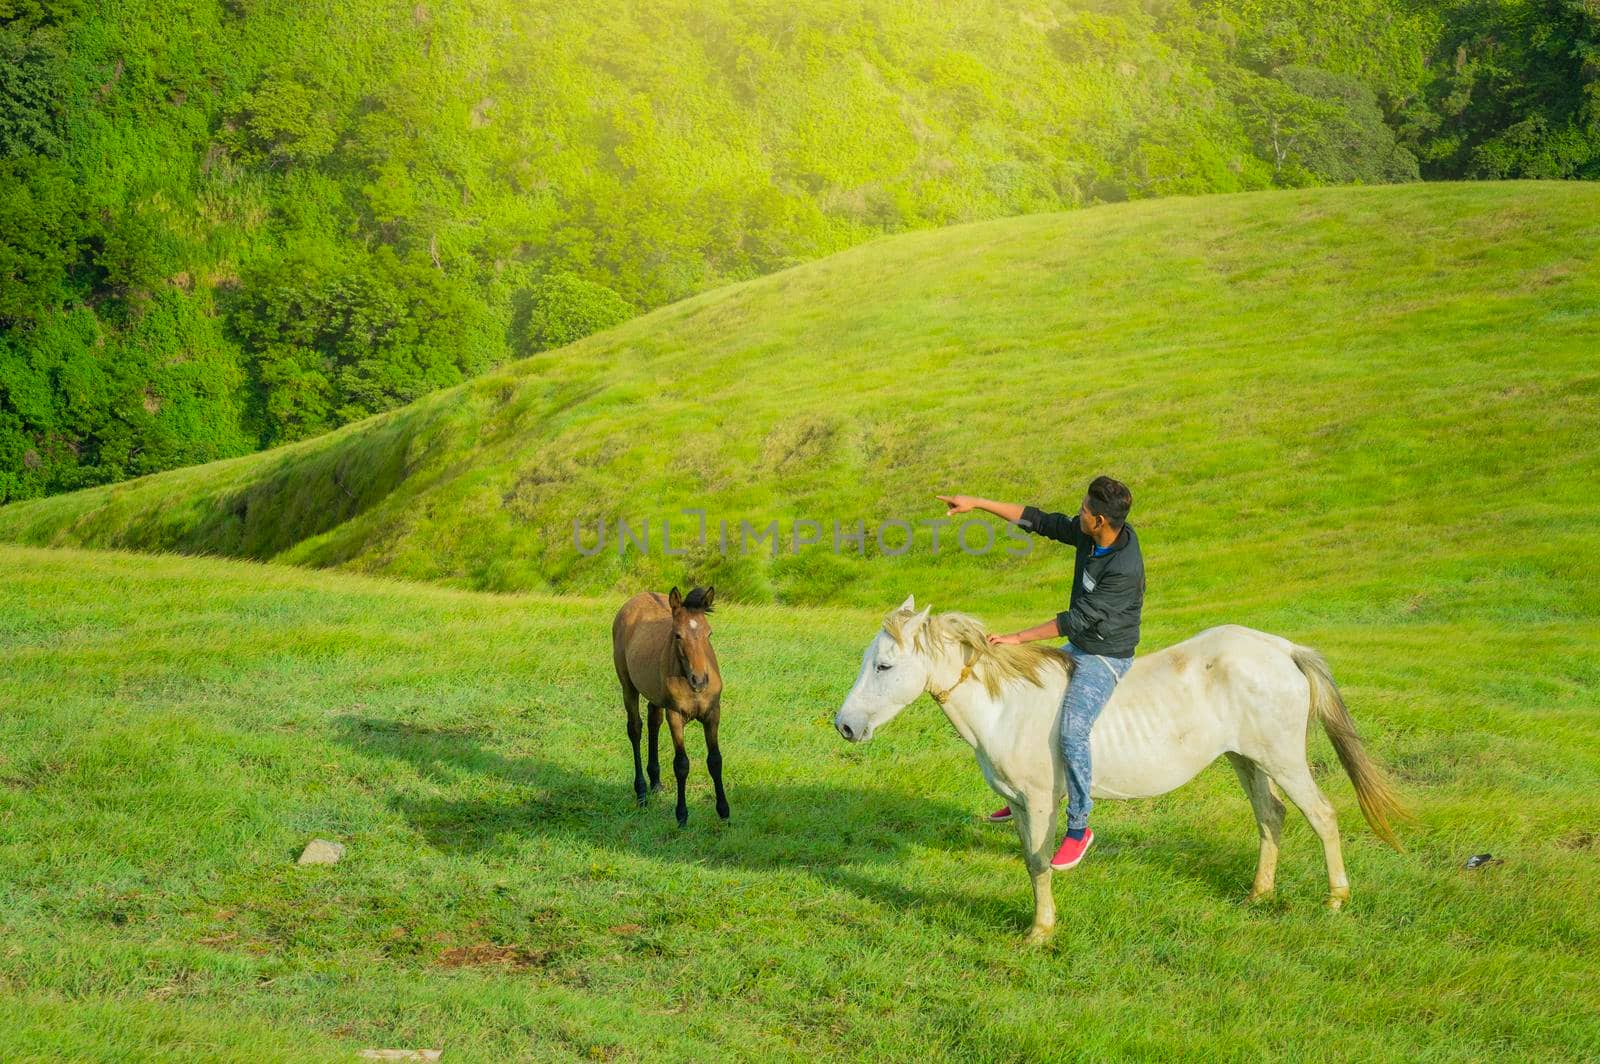 Young man in the field riding horse, A man riding horse in the field and pointing, riding a beautiful horse in the field